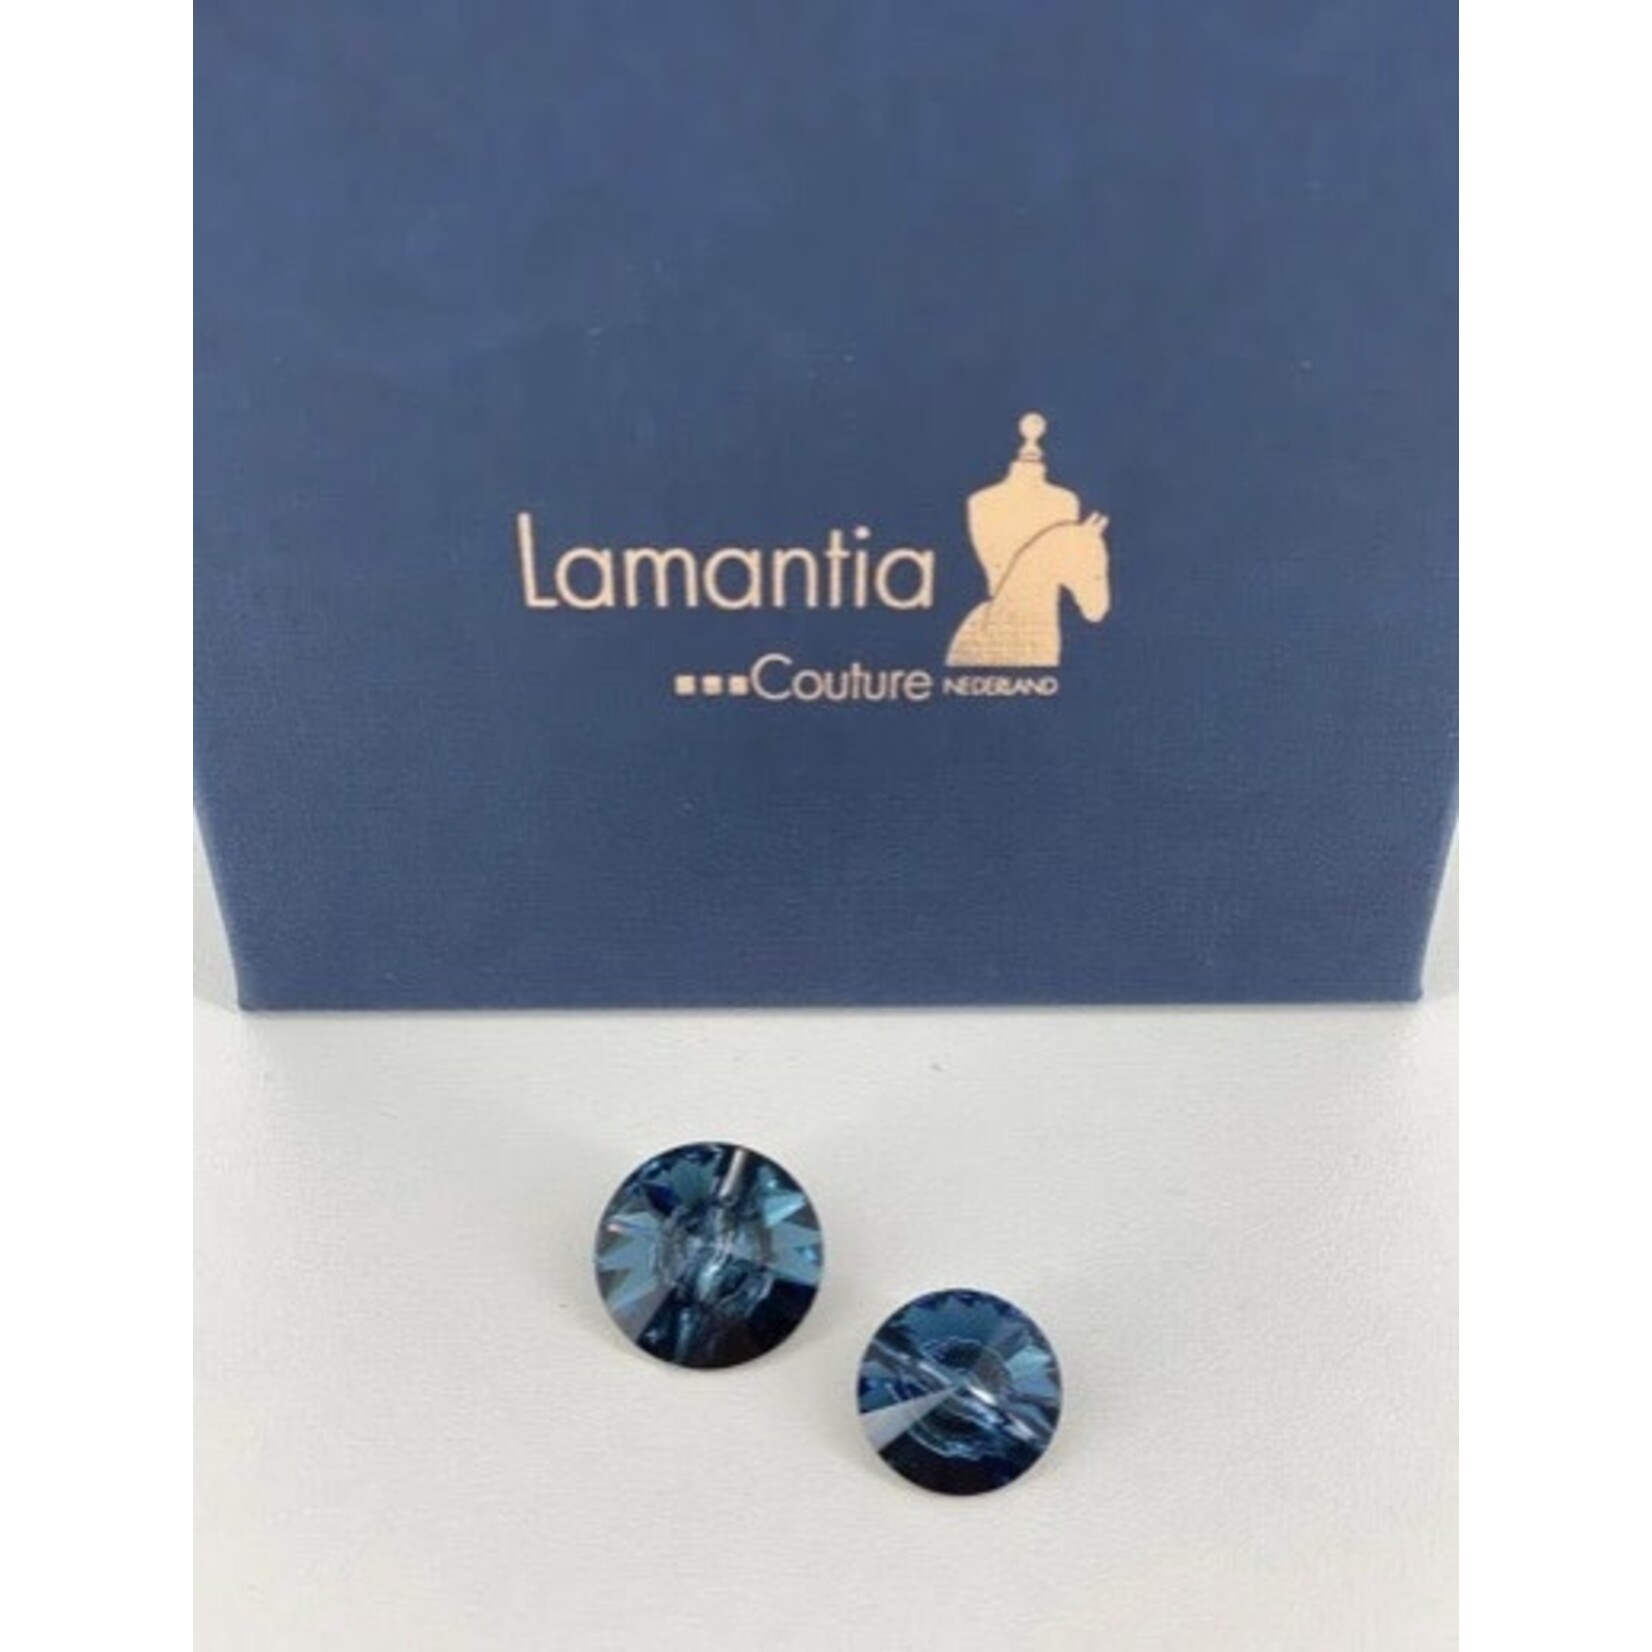 Lamantia Couture Nederland Swarovski button crystal montana small single with back 14mm